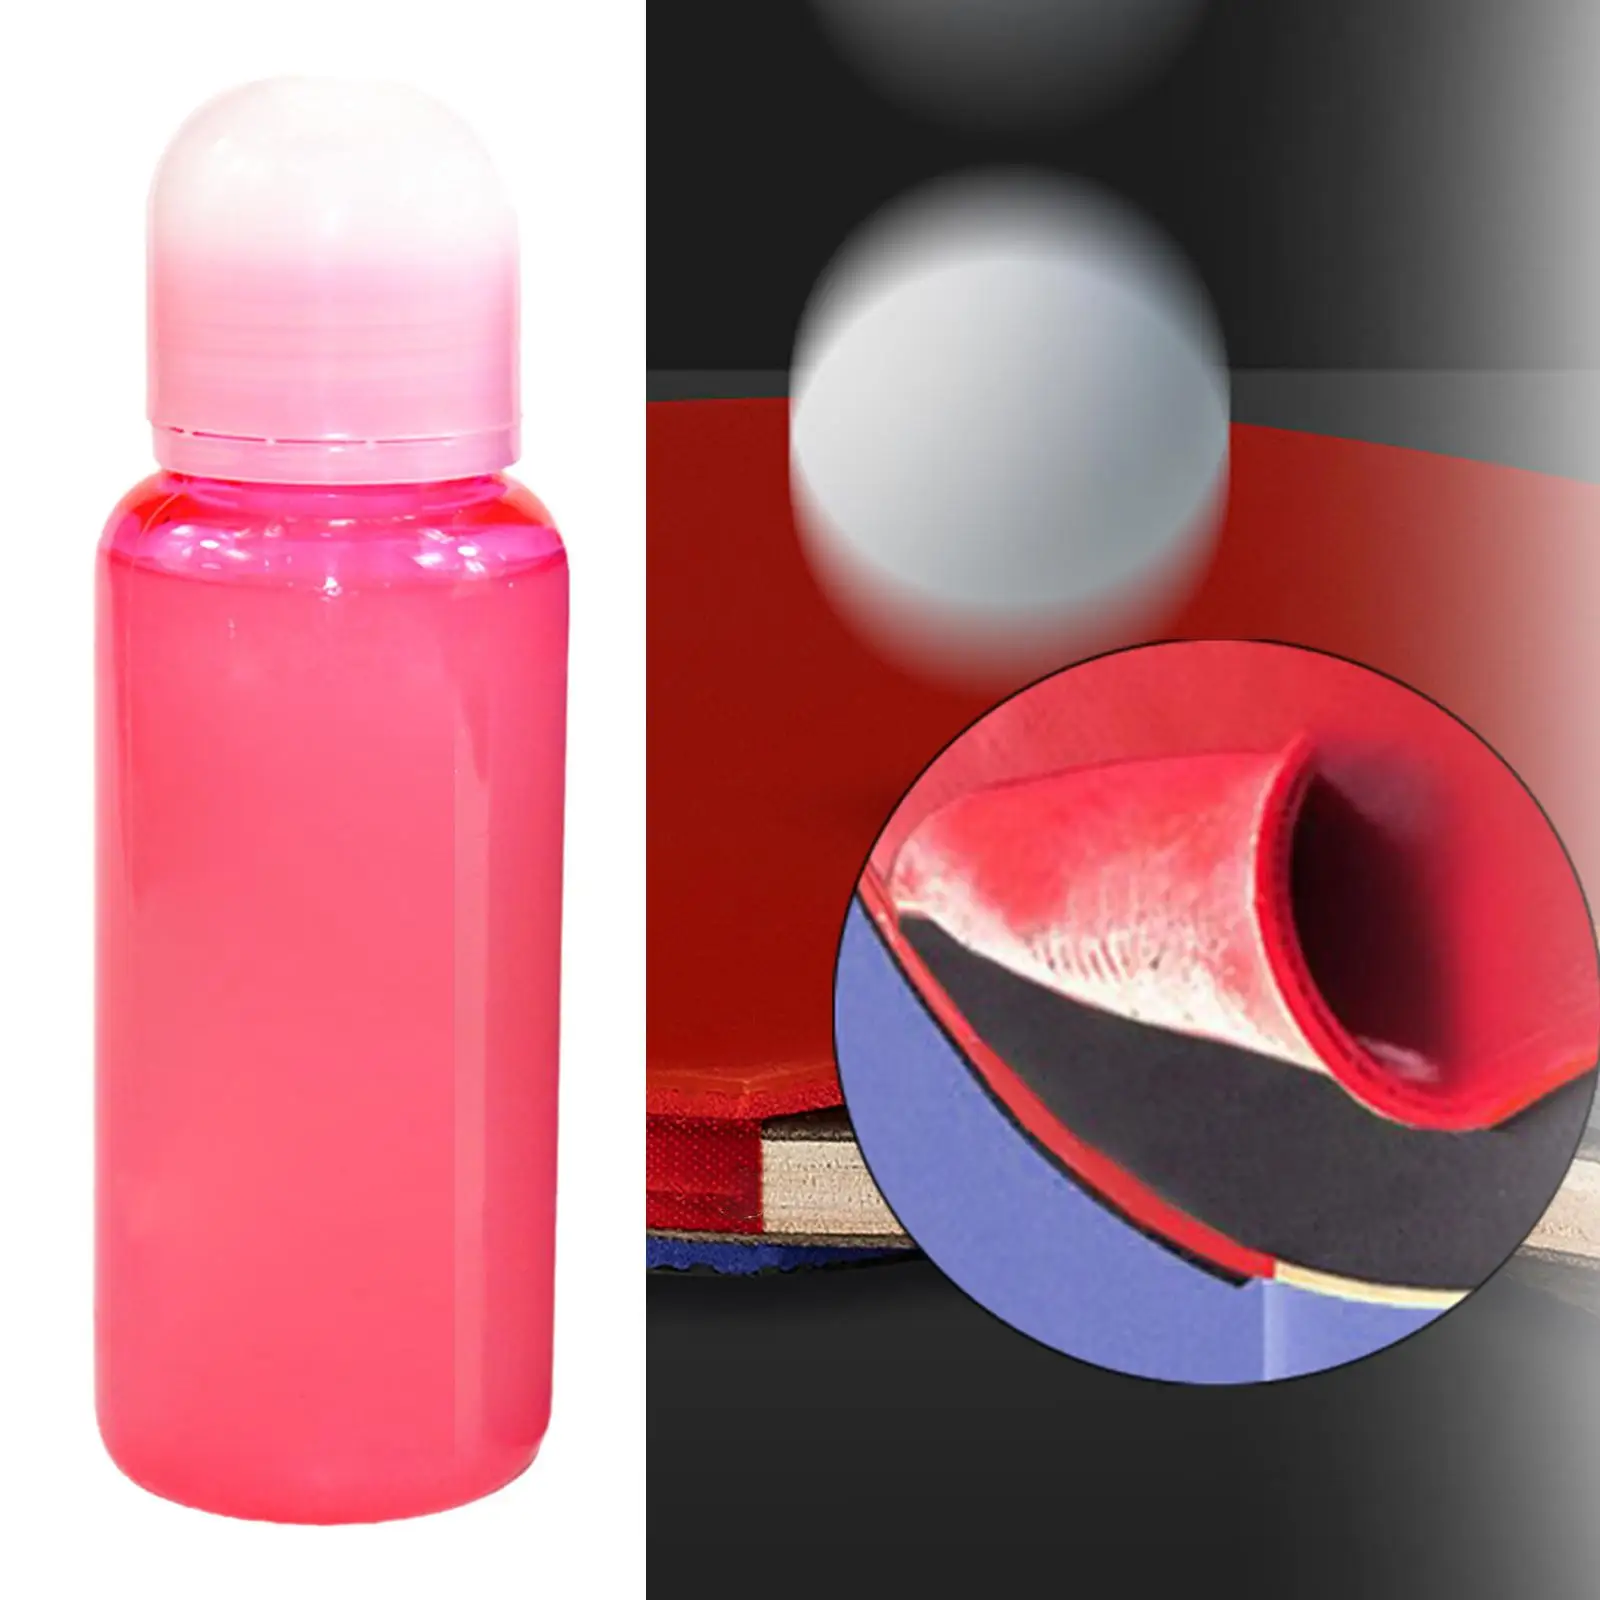 250ml Table Tennis Liquid Glue Professional Durable DIY Pingpong Racket Sturdy Improve Ball Speed Speed Glue with Built-in Brush